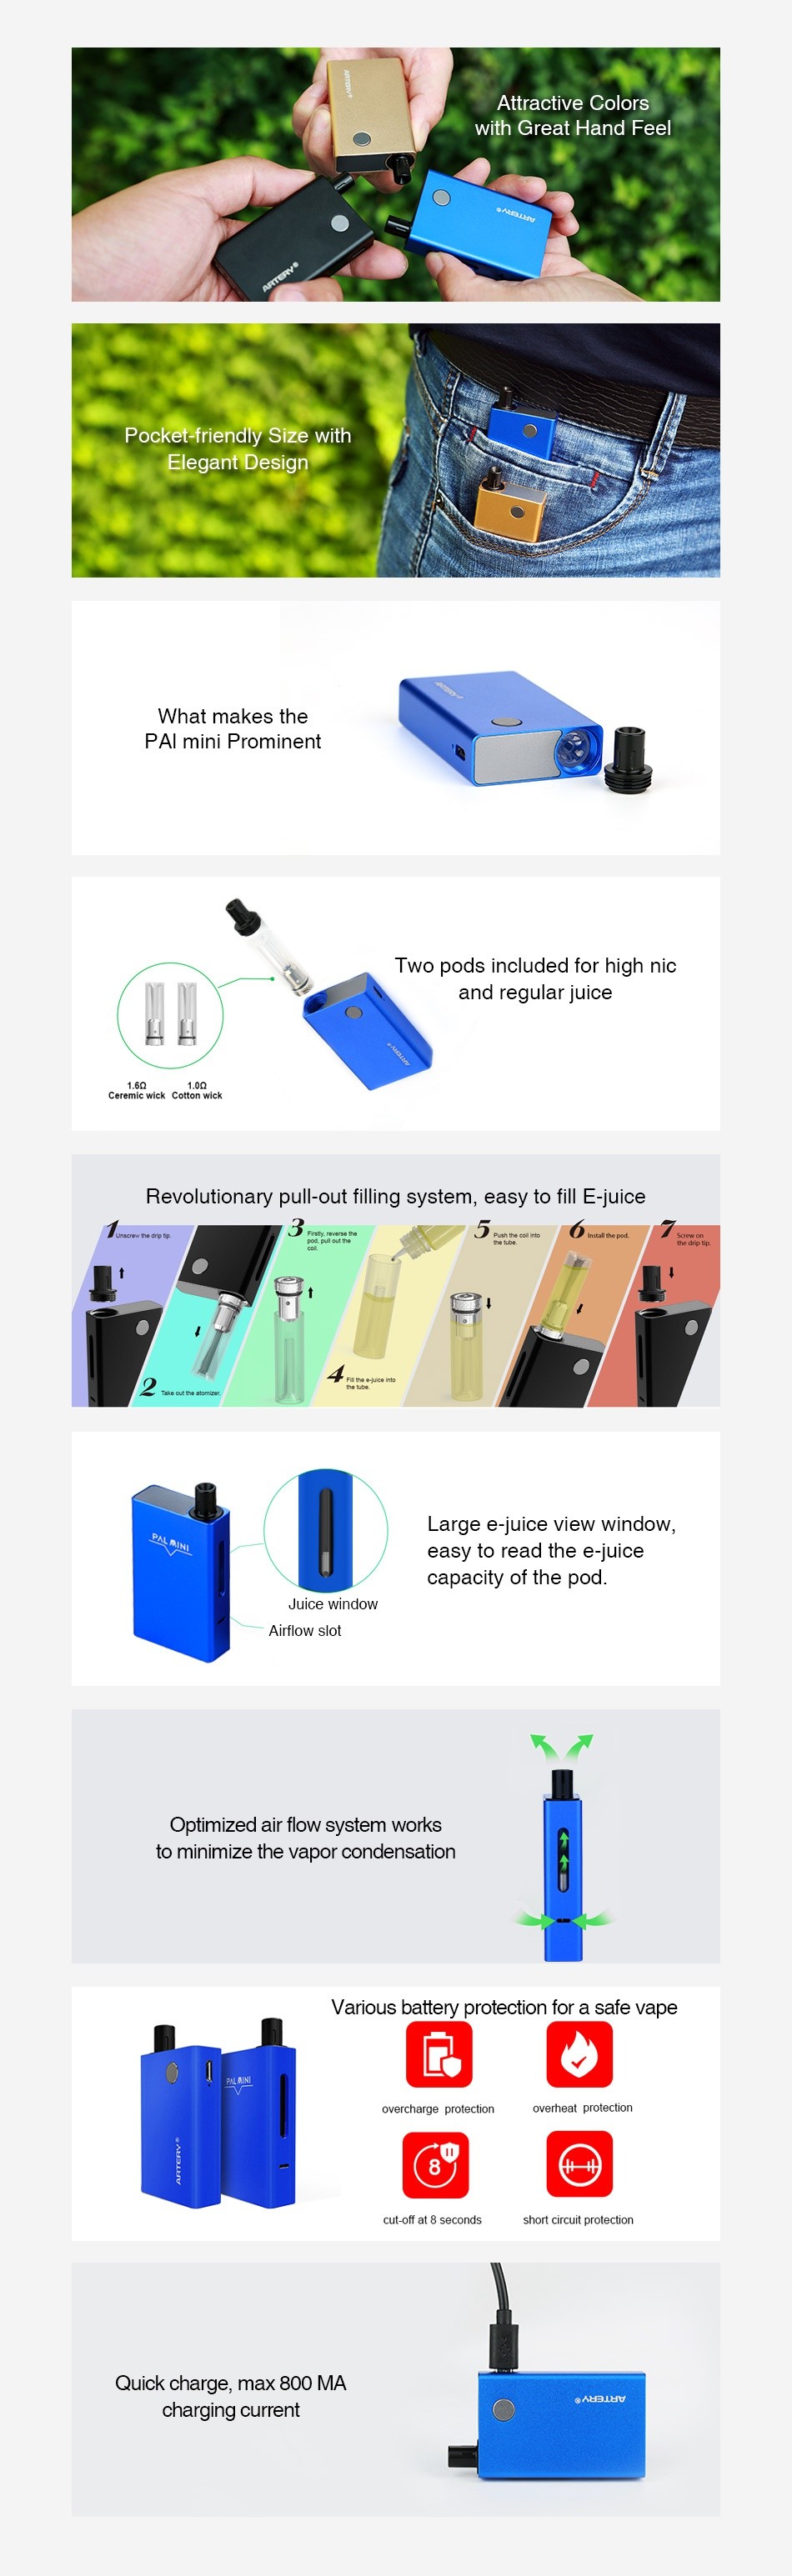 Artery PAL Mini Starter Kit 1000mAh tractive colors with Great Hand Feel Pocket friendly Size with What makes the PAI mini Prominent Two pods included for high nic and regular juice Revolutionary pull out filling system  easy to fill E jui 3 2 Large e juice view window easy to read the e juice capacity of the pod Optimized air flow system works to minimize the vapor condensation Various battery protection for a safe vape   overcharge protection ul oll al gs curds shuit circul puutccten Quick charge  max 800 MA charging current